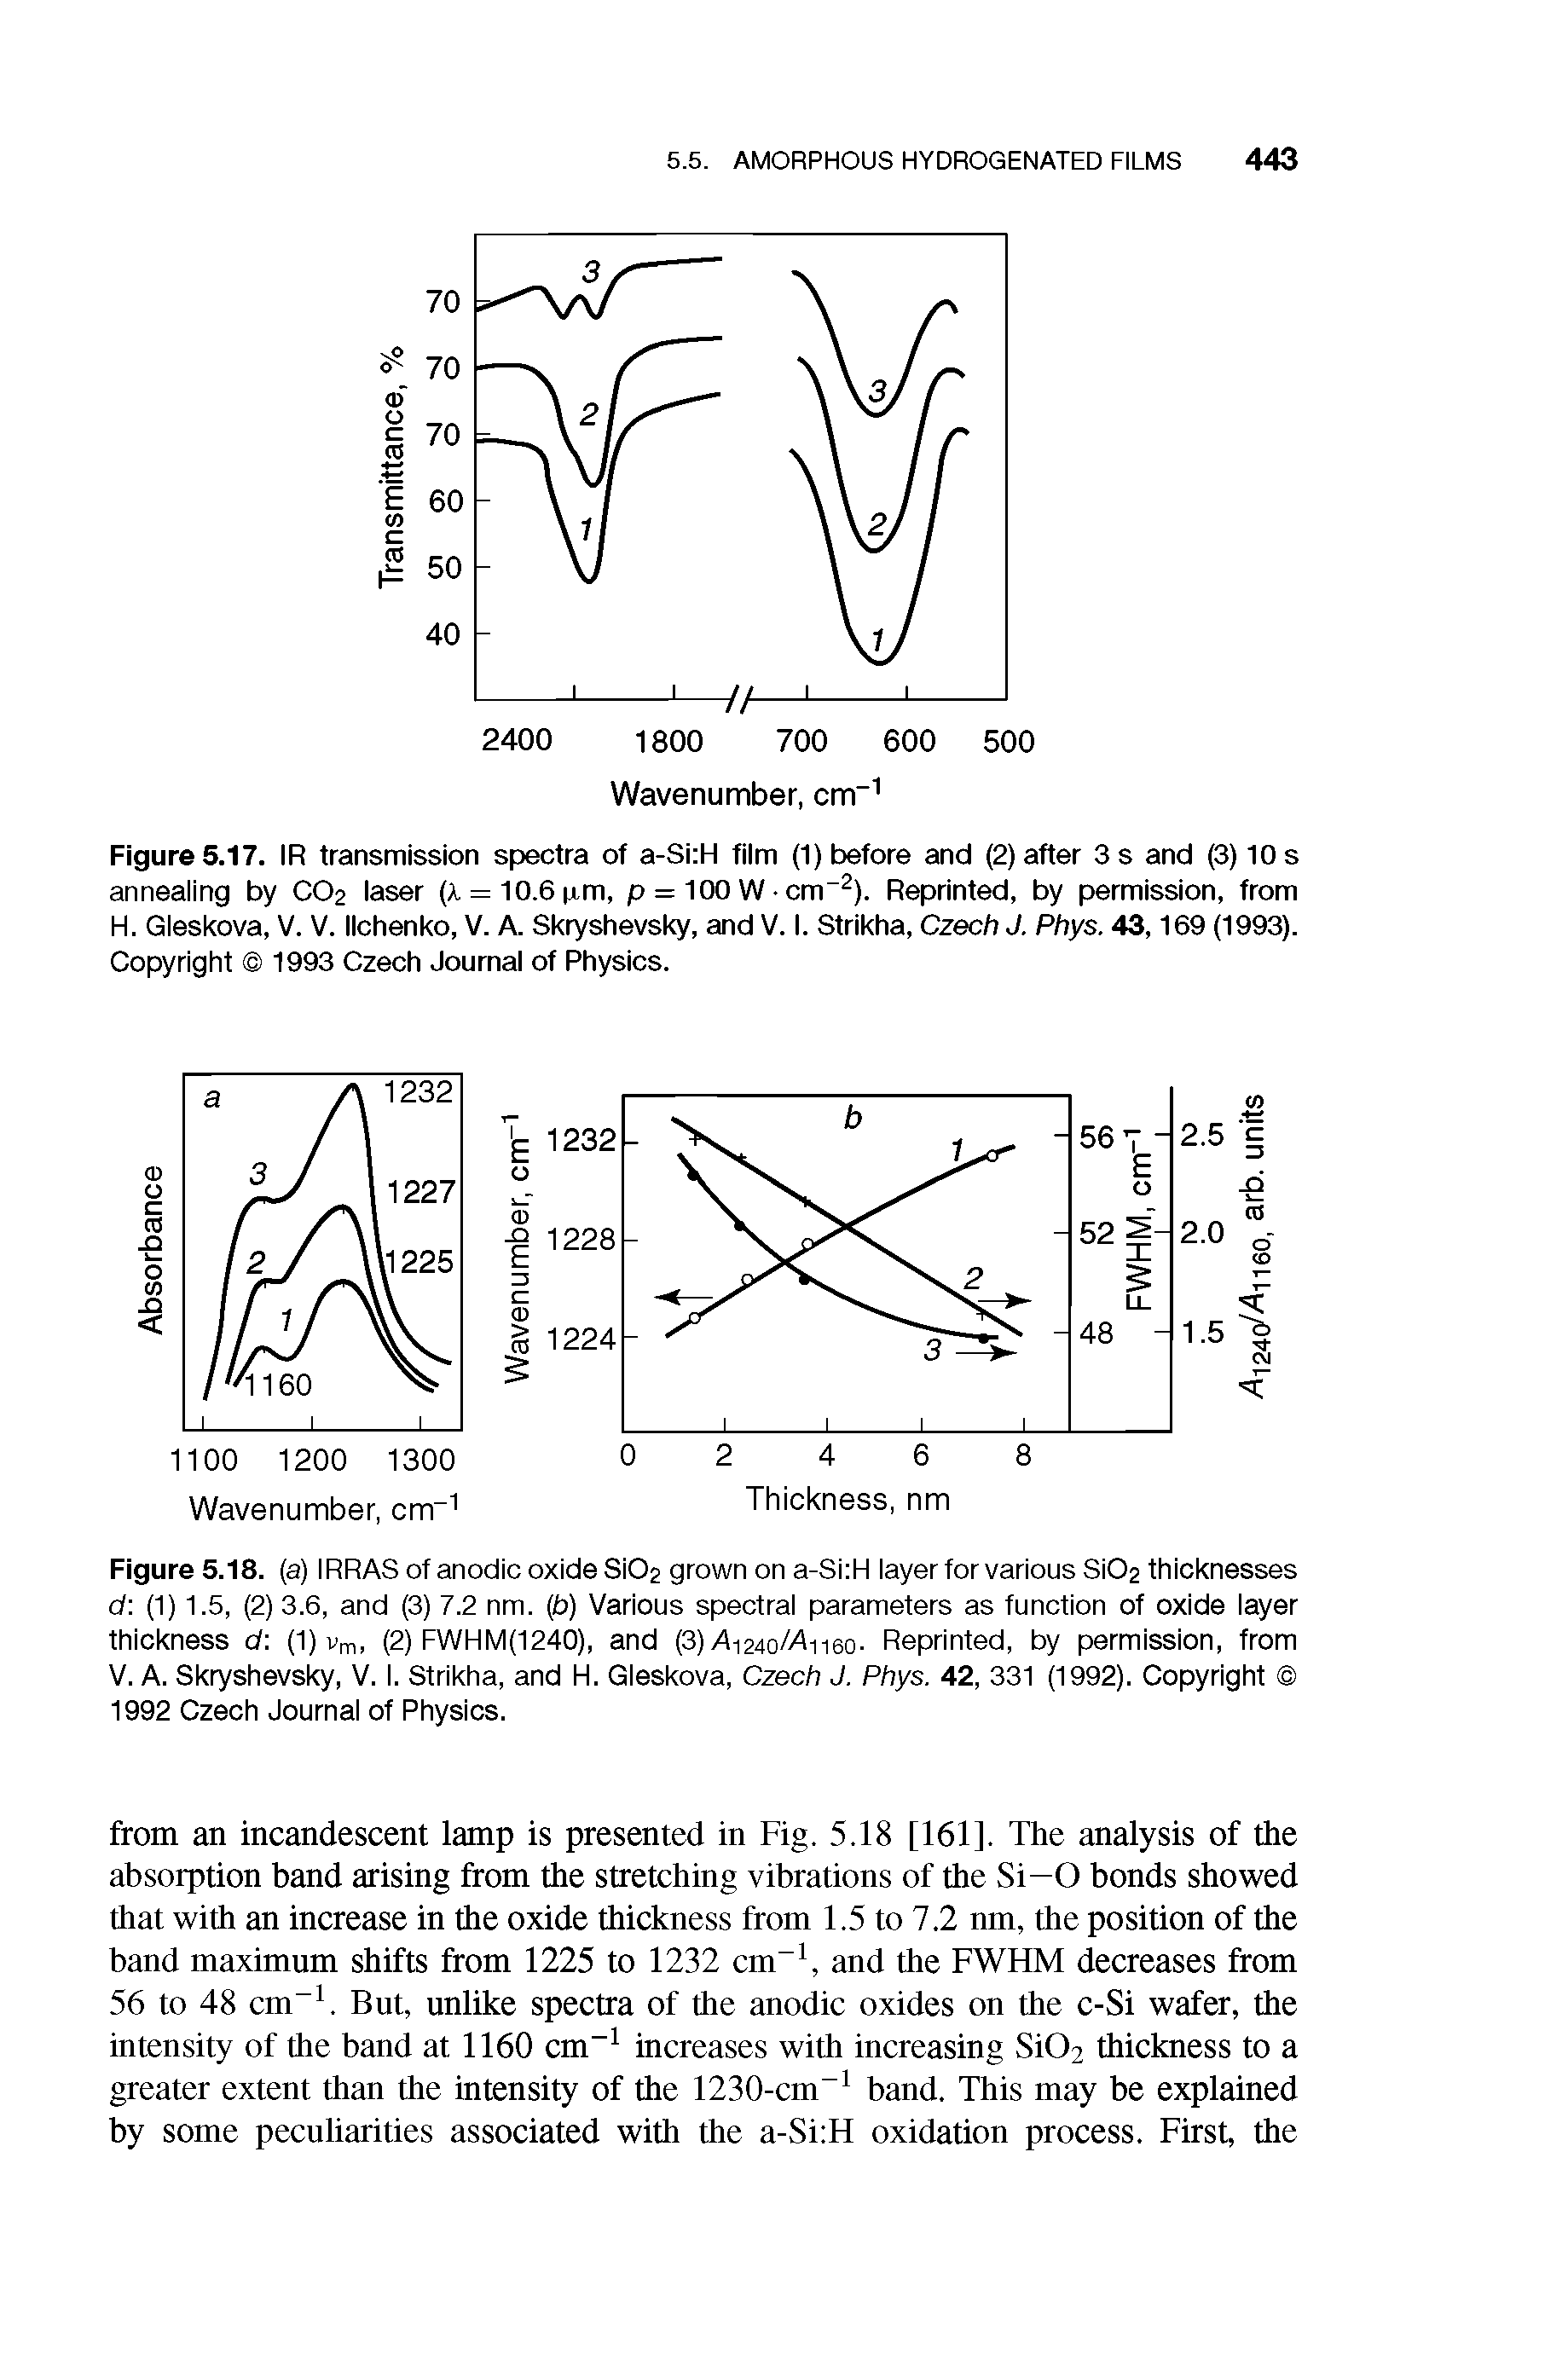 Figure 5.17. IR transmission spectra of a-Si H film (l)iDefore and (2) after 3 s and (3) 10 s annealing by CO2 laser (X = 10.6 xm, p = 100 W cm" ). Reprinted, by permission, from H. Gleskova, V. V. Ilchenko, V. A. Skryshevsky, and V. I. Strikha, Czech J. Phys. 43,169 (1993). Copyright 1993 Czech Journal of Physics.